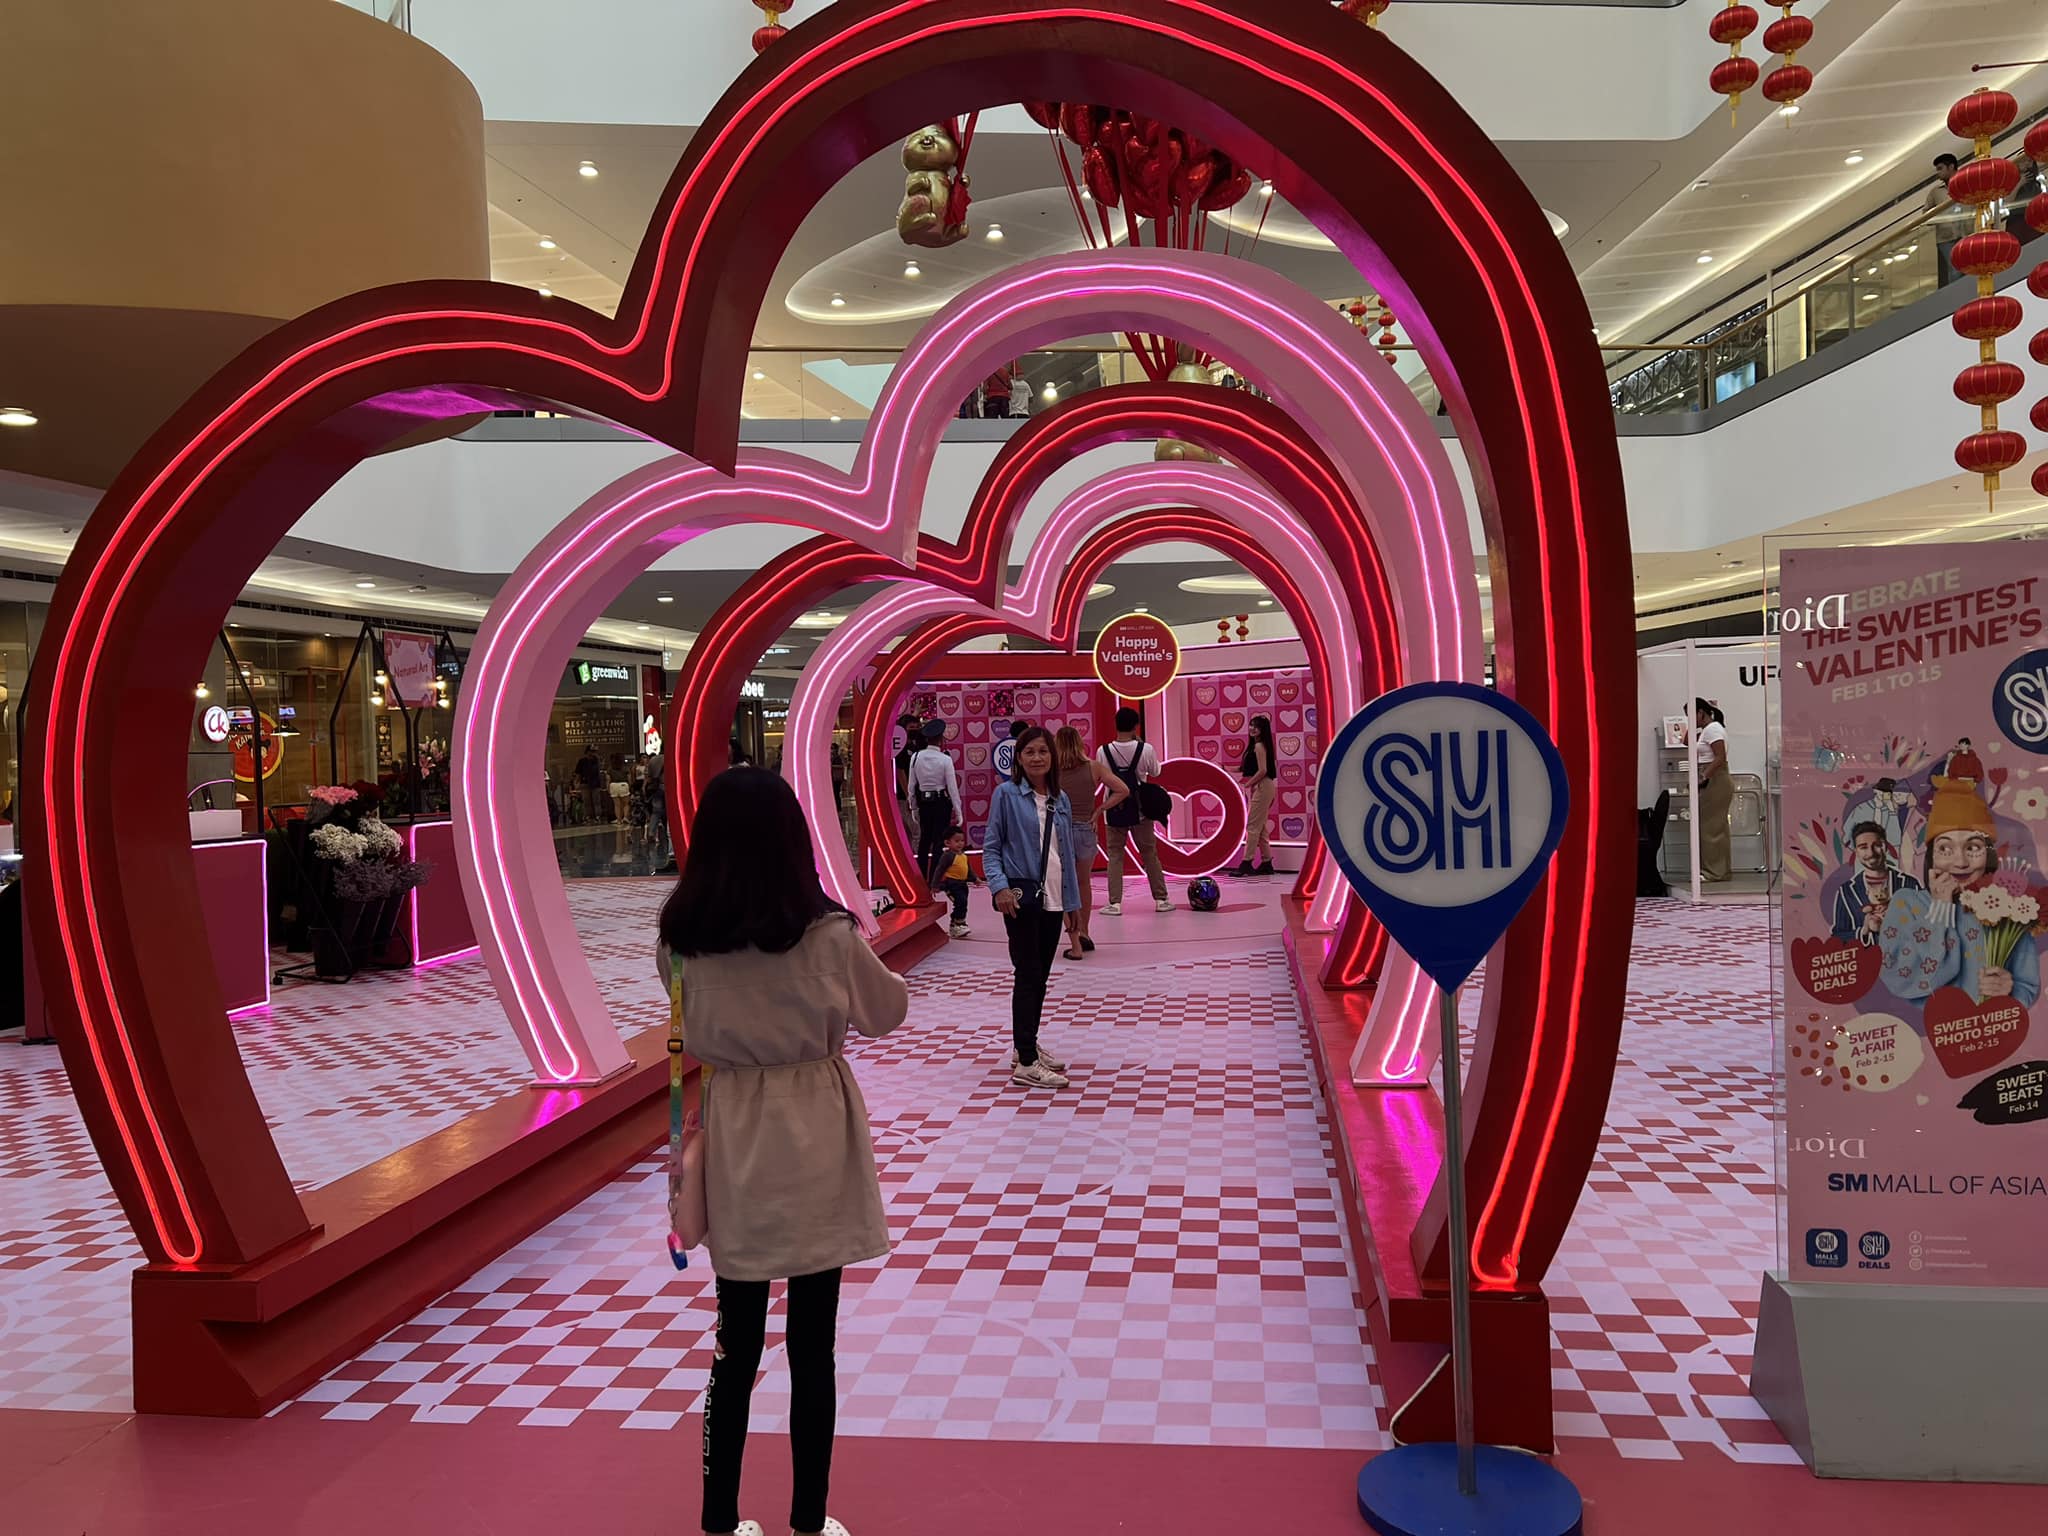 Sweet-A-Fair at SM Mall of Asia - heart-shaped arch